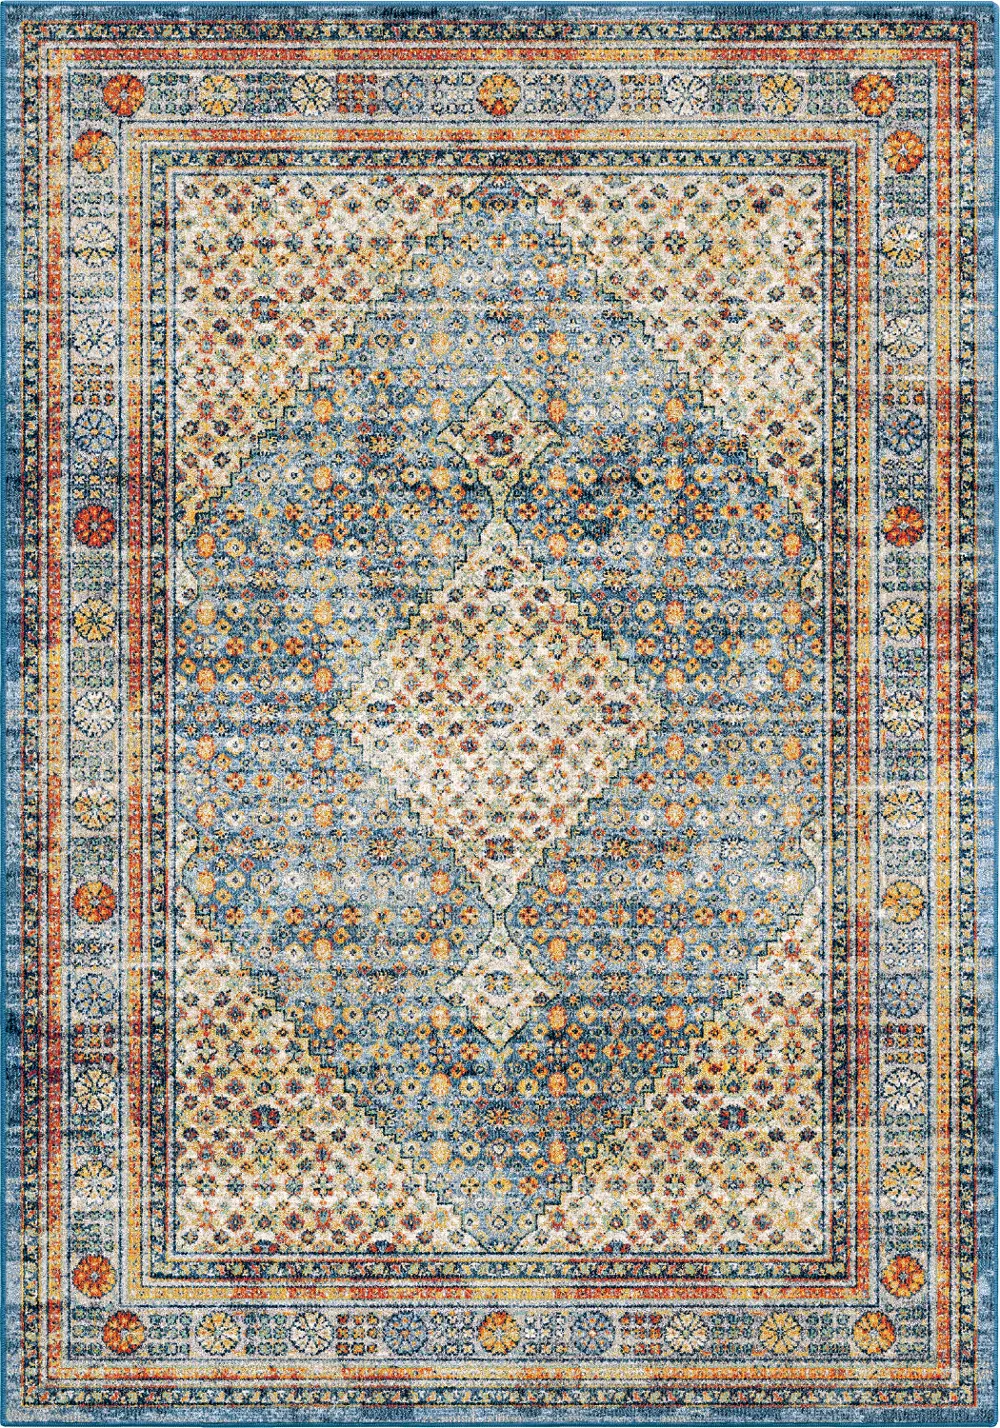 9514/5X8-EXCALIBER Imperial 5' x 8' Excaliber Distressed Blue Area Rug-1